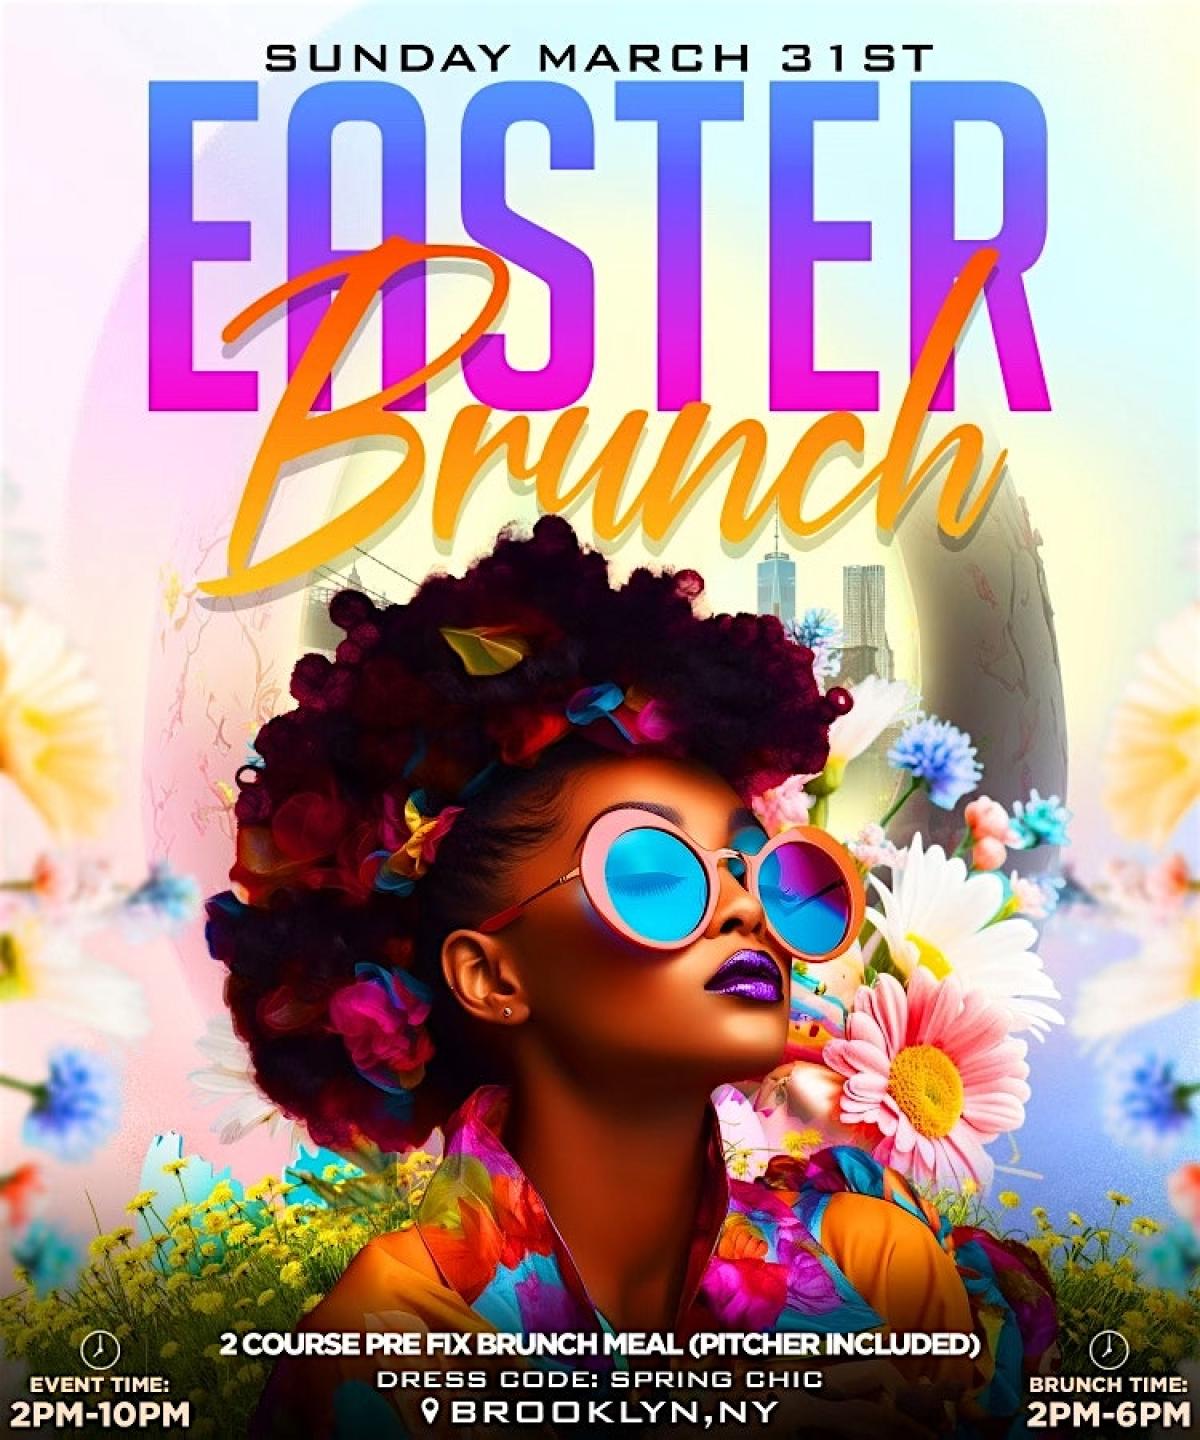 The Easter Brunch flyer or graphic.